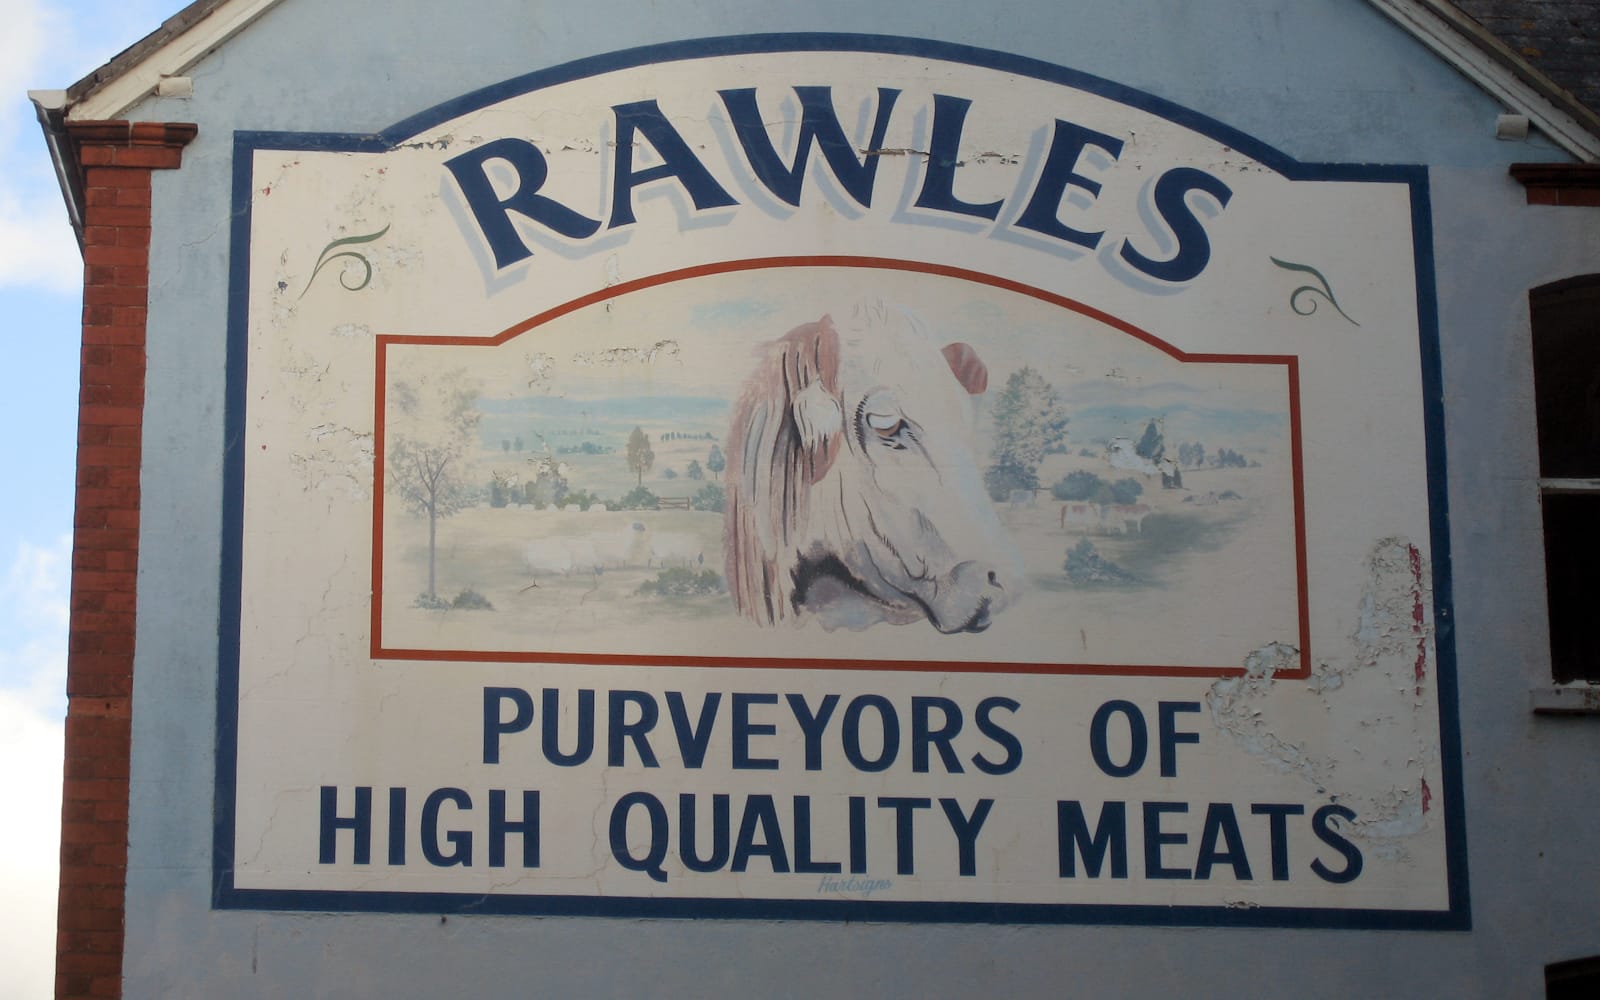 A sign painted on a wall advertising the Rawles butchers. A picture of a cow and a pastoral scene is in the middle, under the name, with lettering in two lines on the bottom that reads "purveyors of high quality meats".